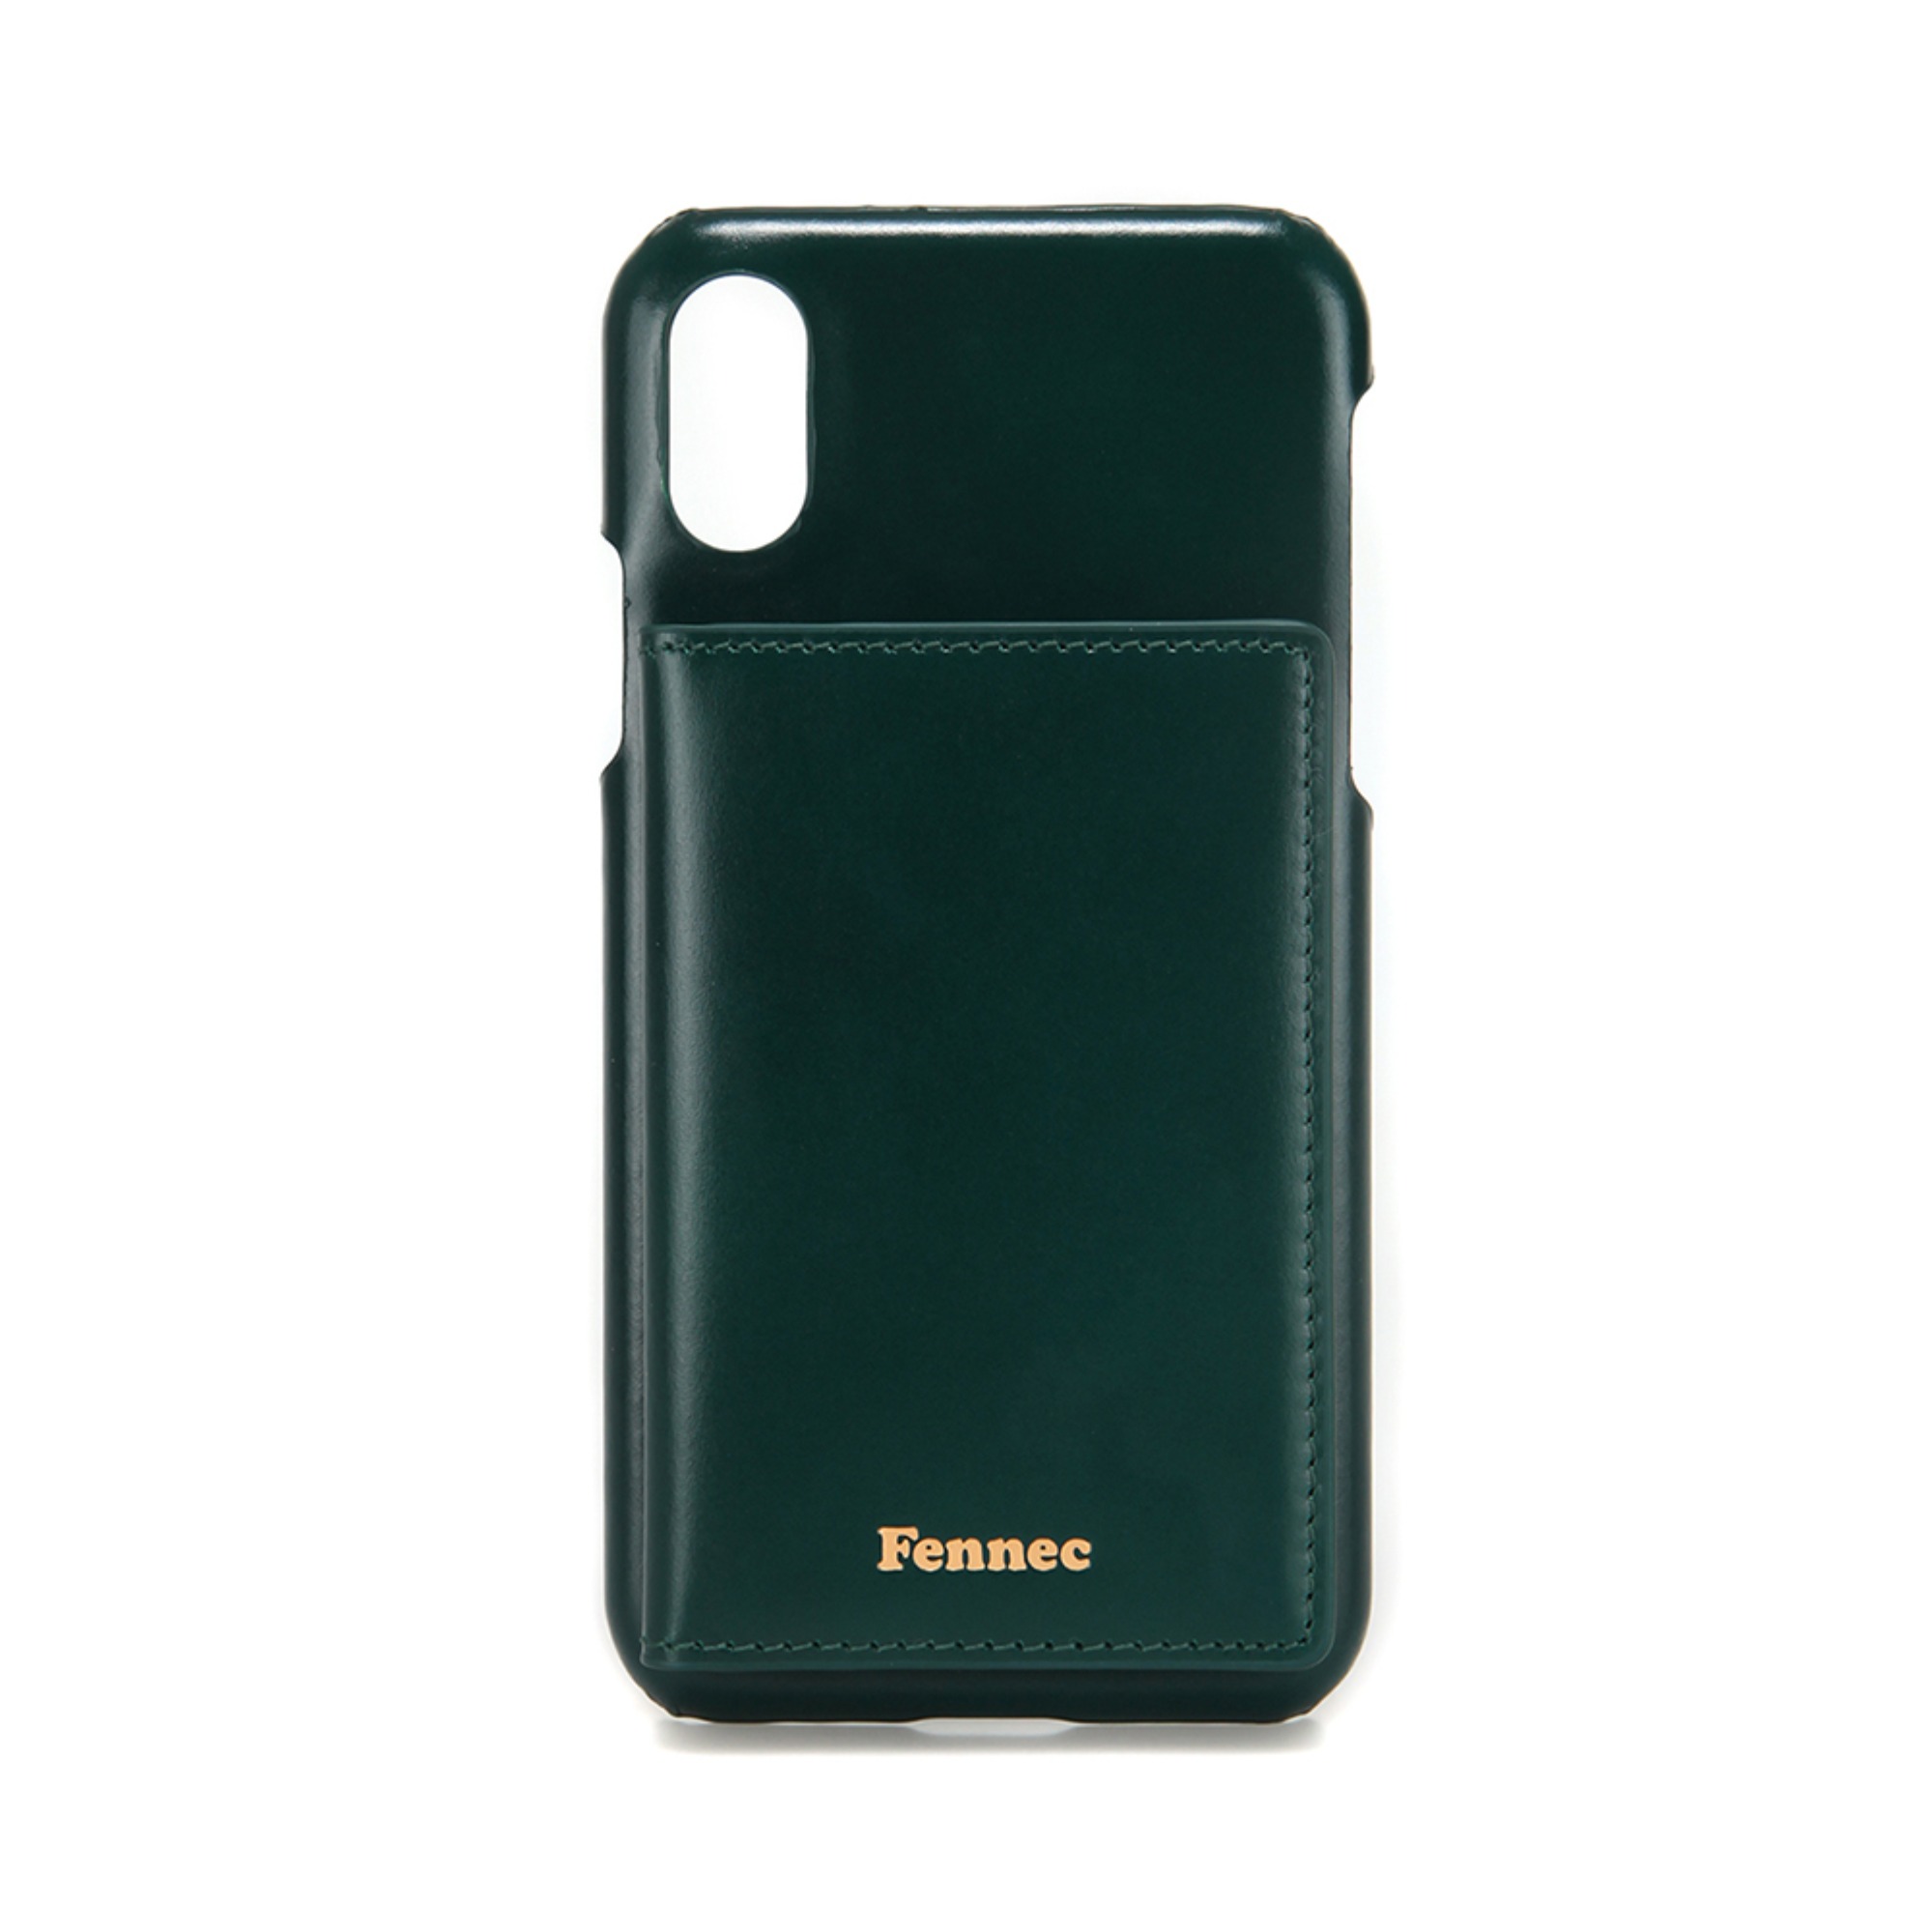 LEATHER iPHONE POCKET CASE - MOSS GREEN (실버로고)